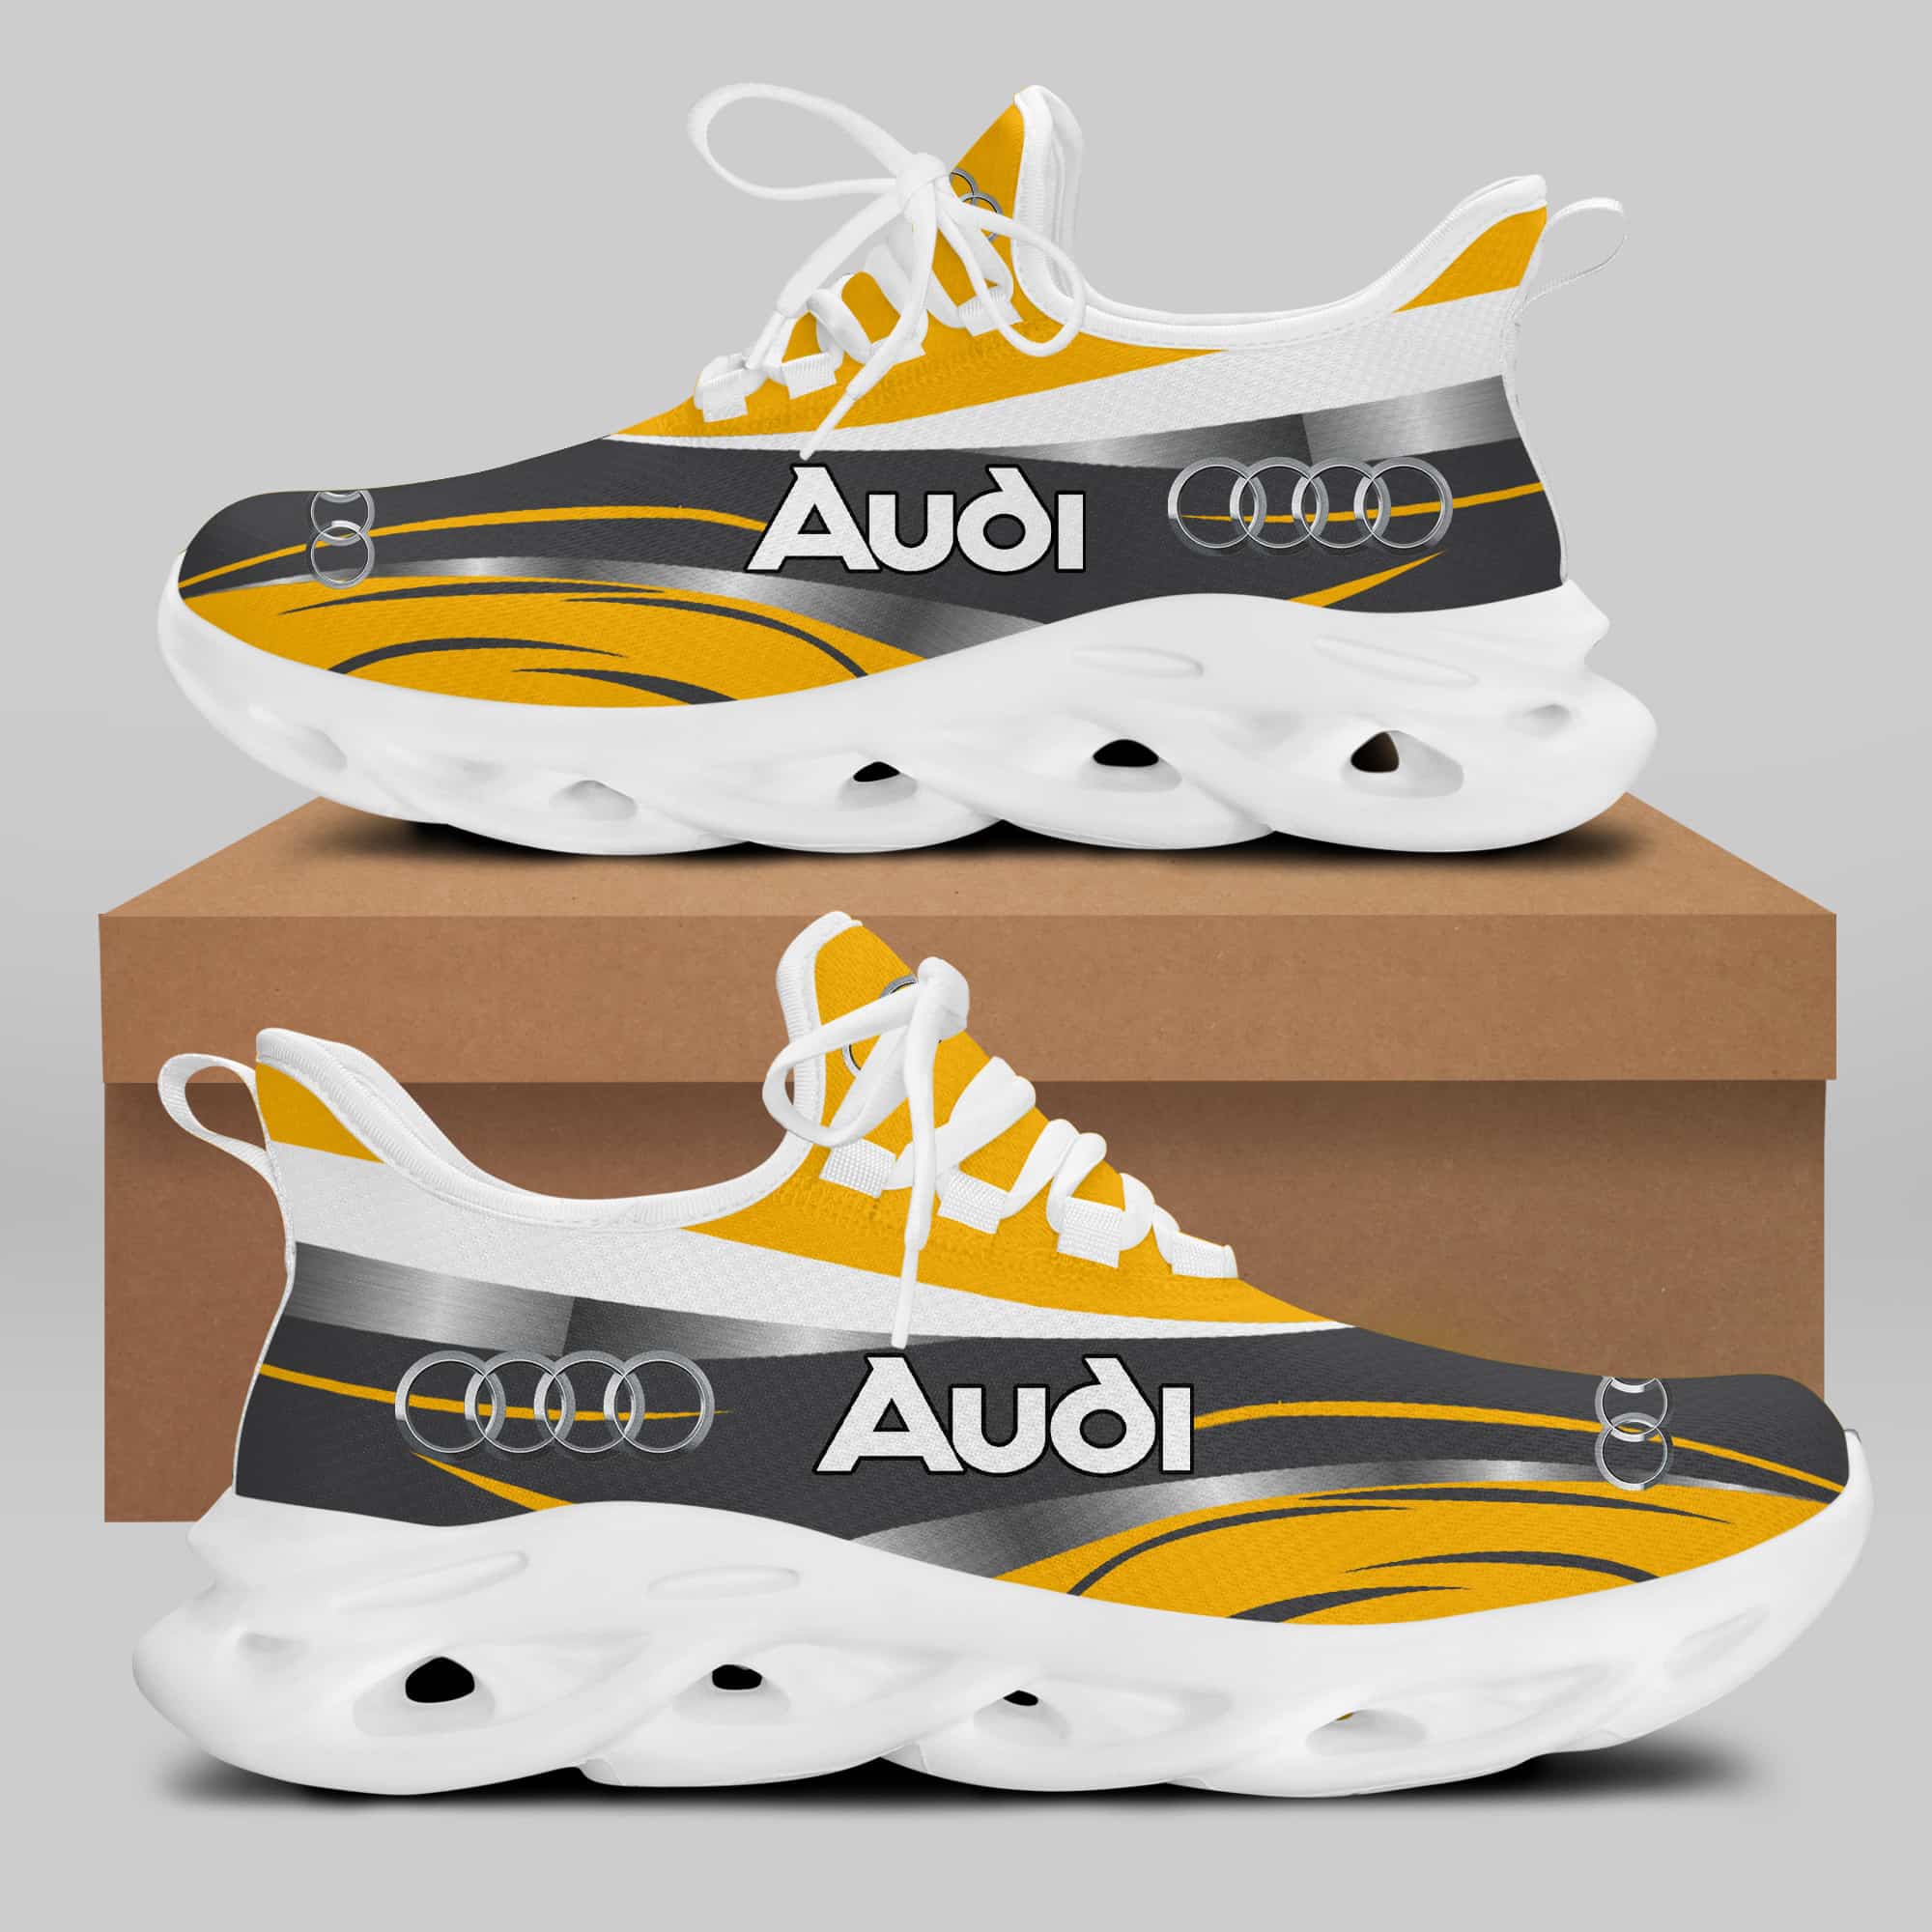 Audi Sport Running Shoes Max Soul Shoes Sneakers Ver 54 2